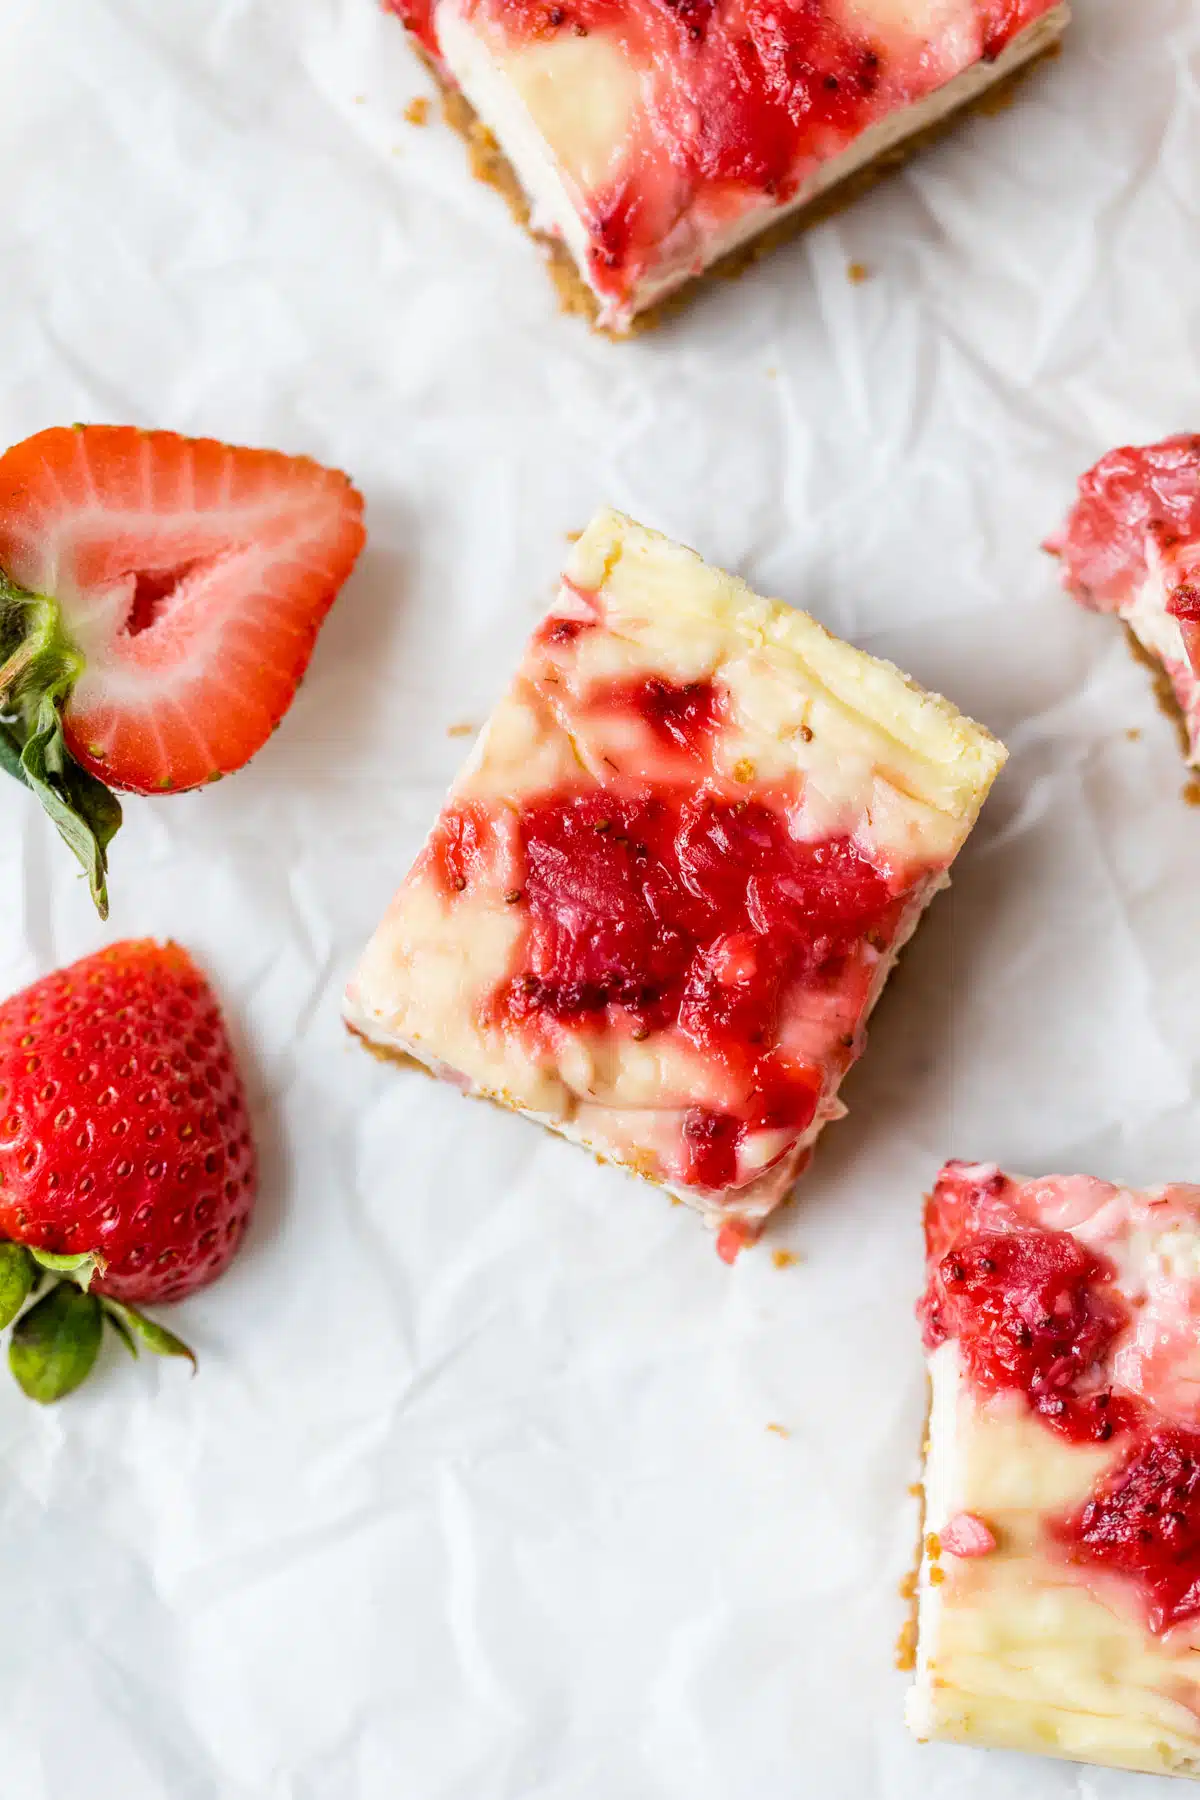 a dessert bar on parchment paper topped with strawberries